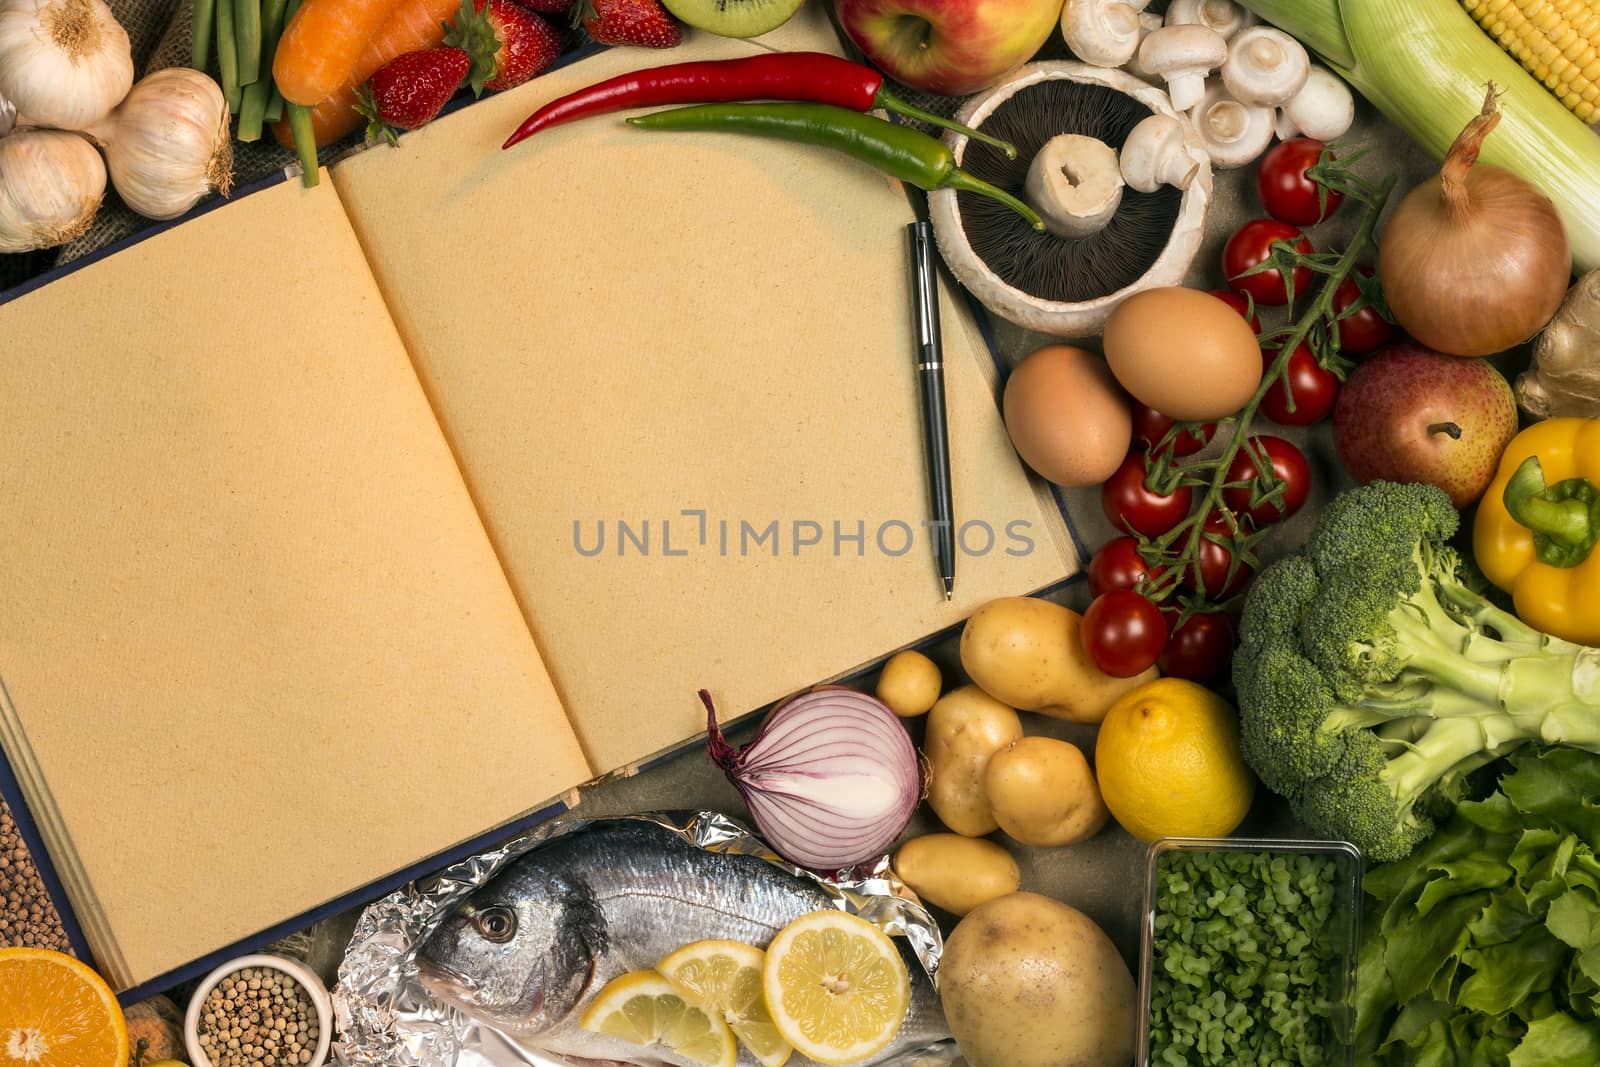 Staple foods - Fruit, Fish and Vegetables with the blank pages of a recipe book - Space for text.